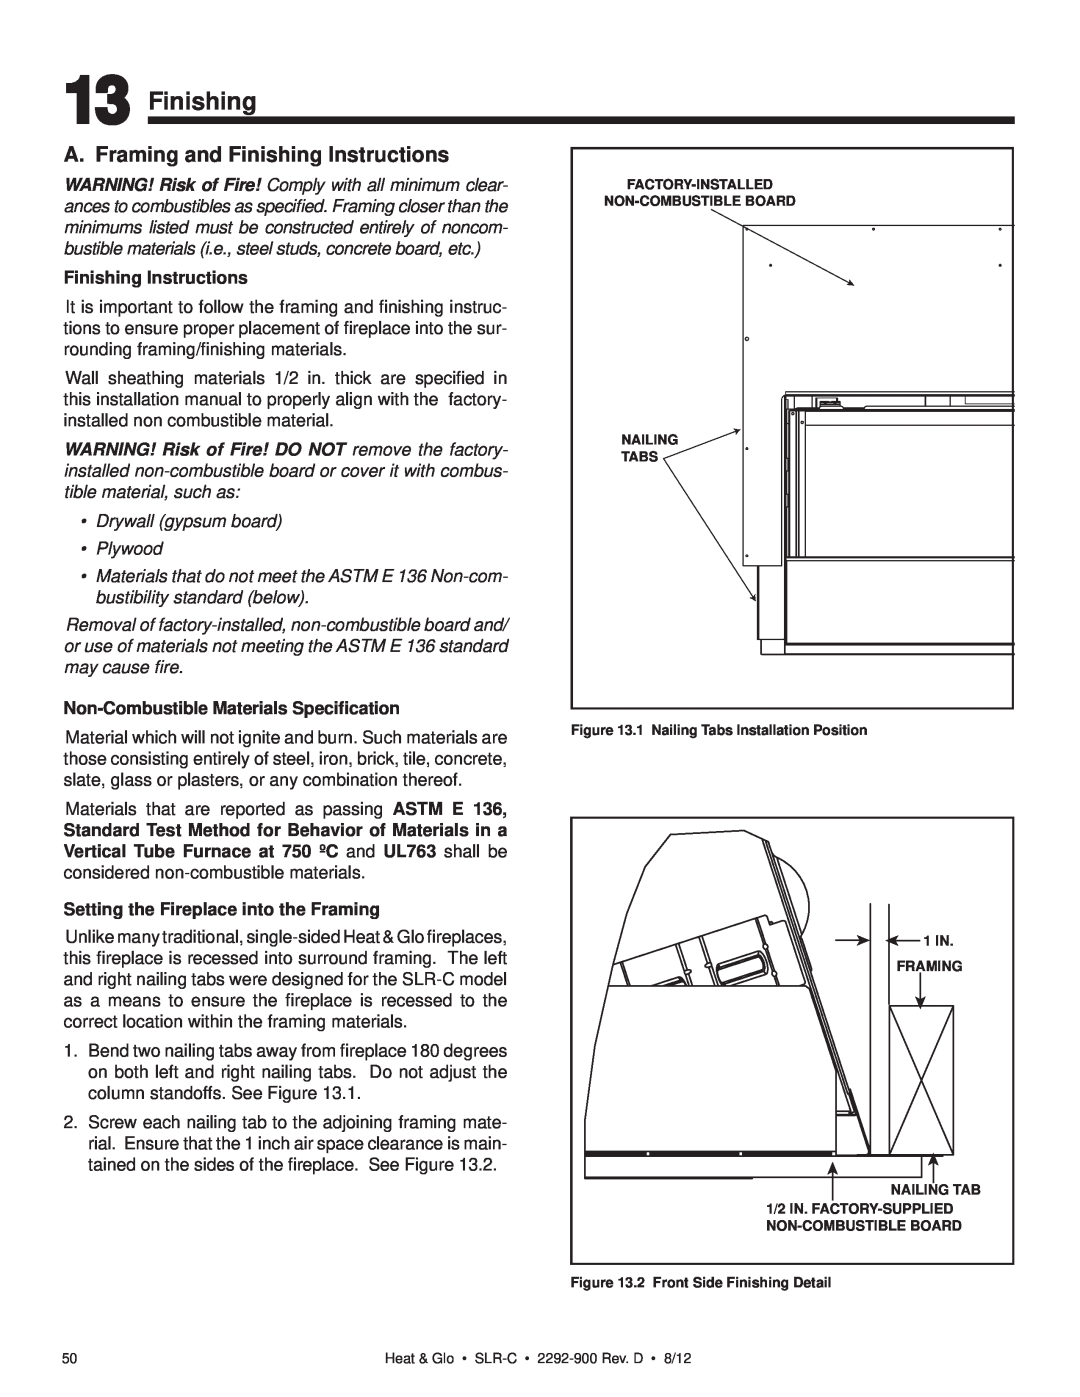 Heat & Glo LifeStyle SLR-C (COSMO) owner manual A. Framing and Finishing Instructions, Drywall gypsum board Plywood 